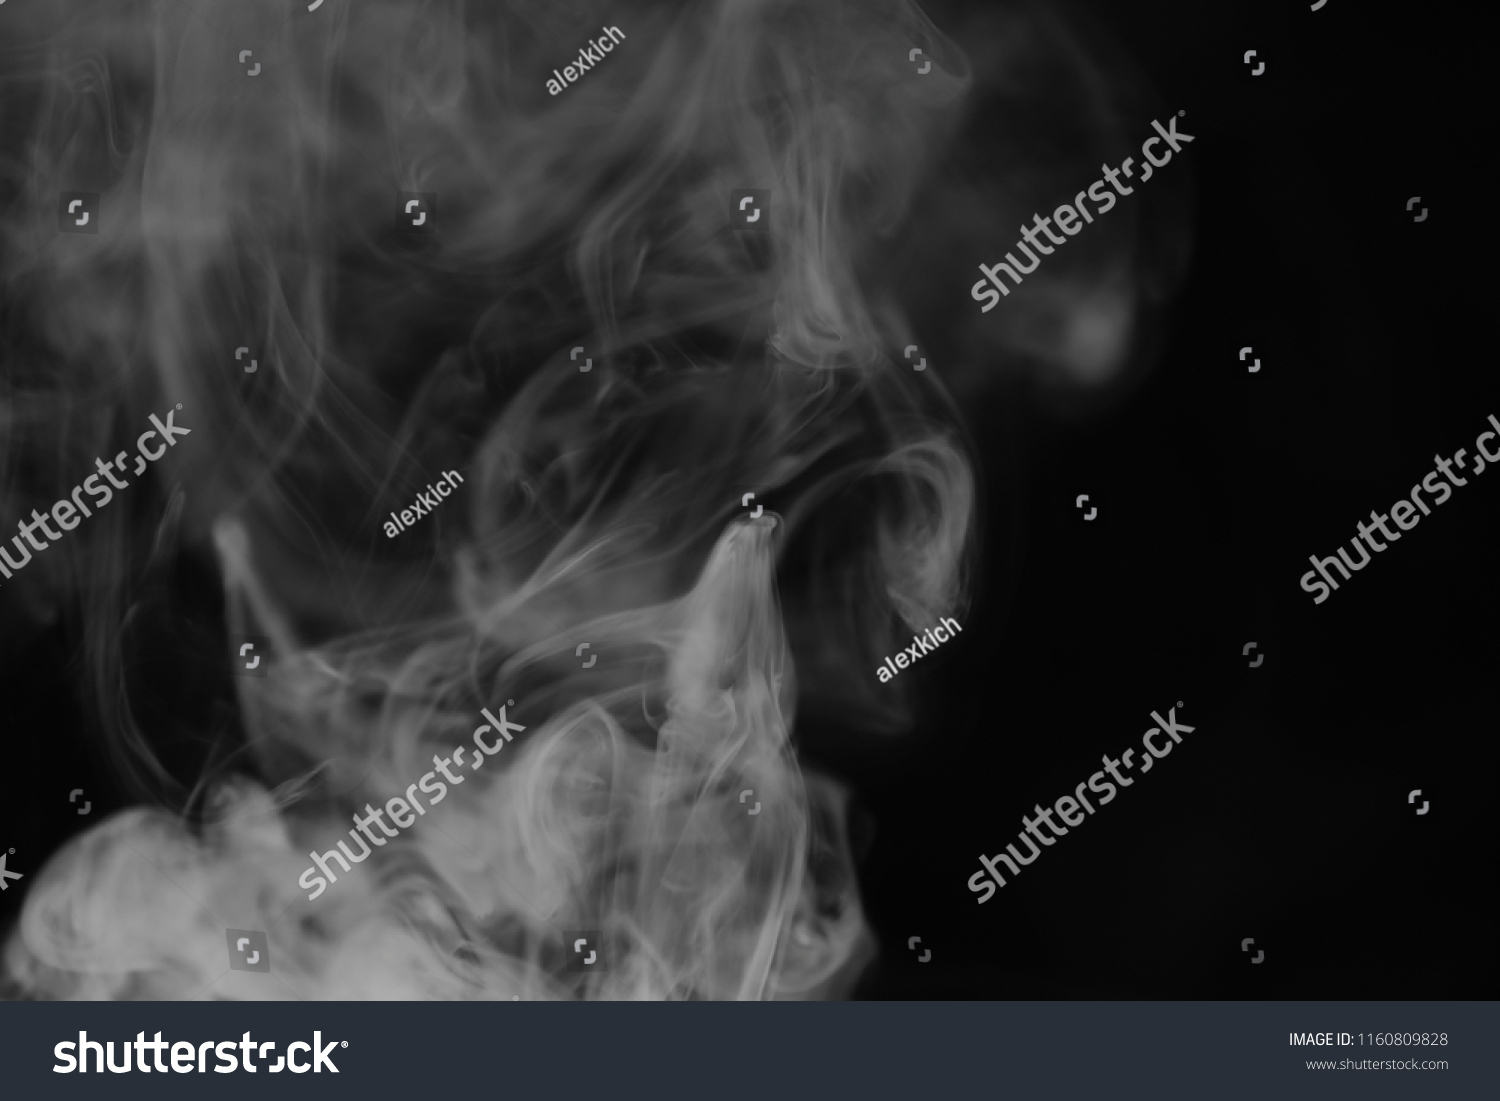 White smoke on a black background. Texture of smoke. Clubs of white smoke on a dark background for overlay
 #1160809828